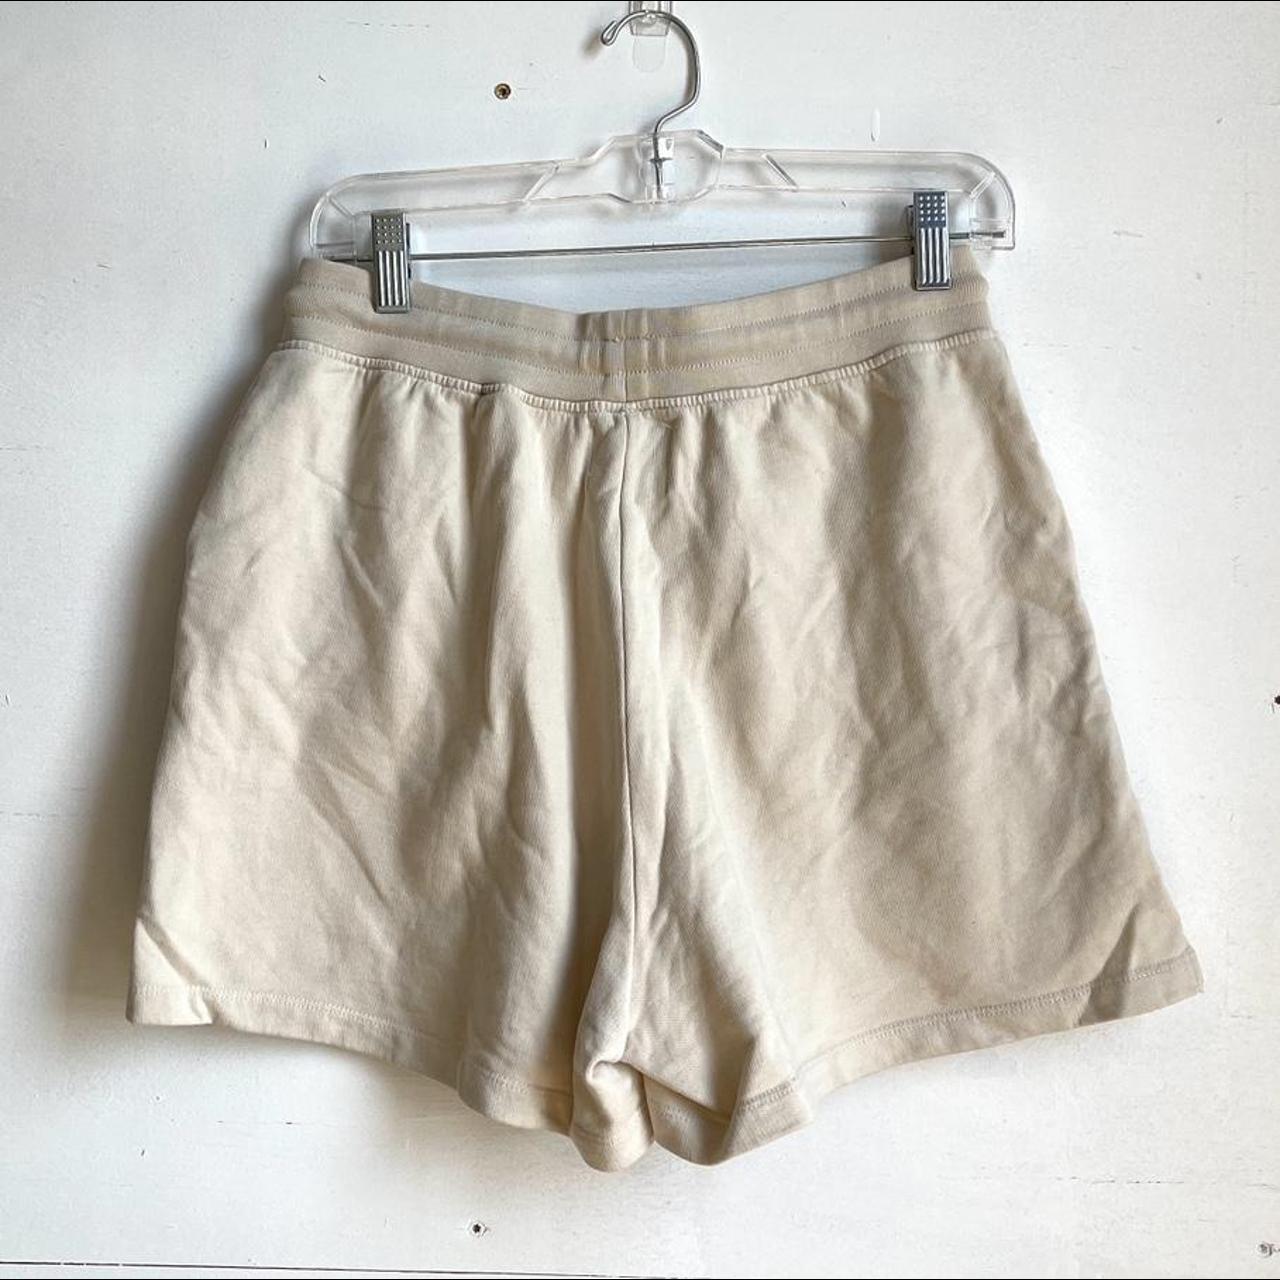 Colorful Standard Women's Cream and White Shorts (8)